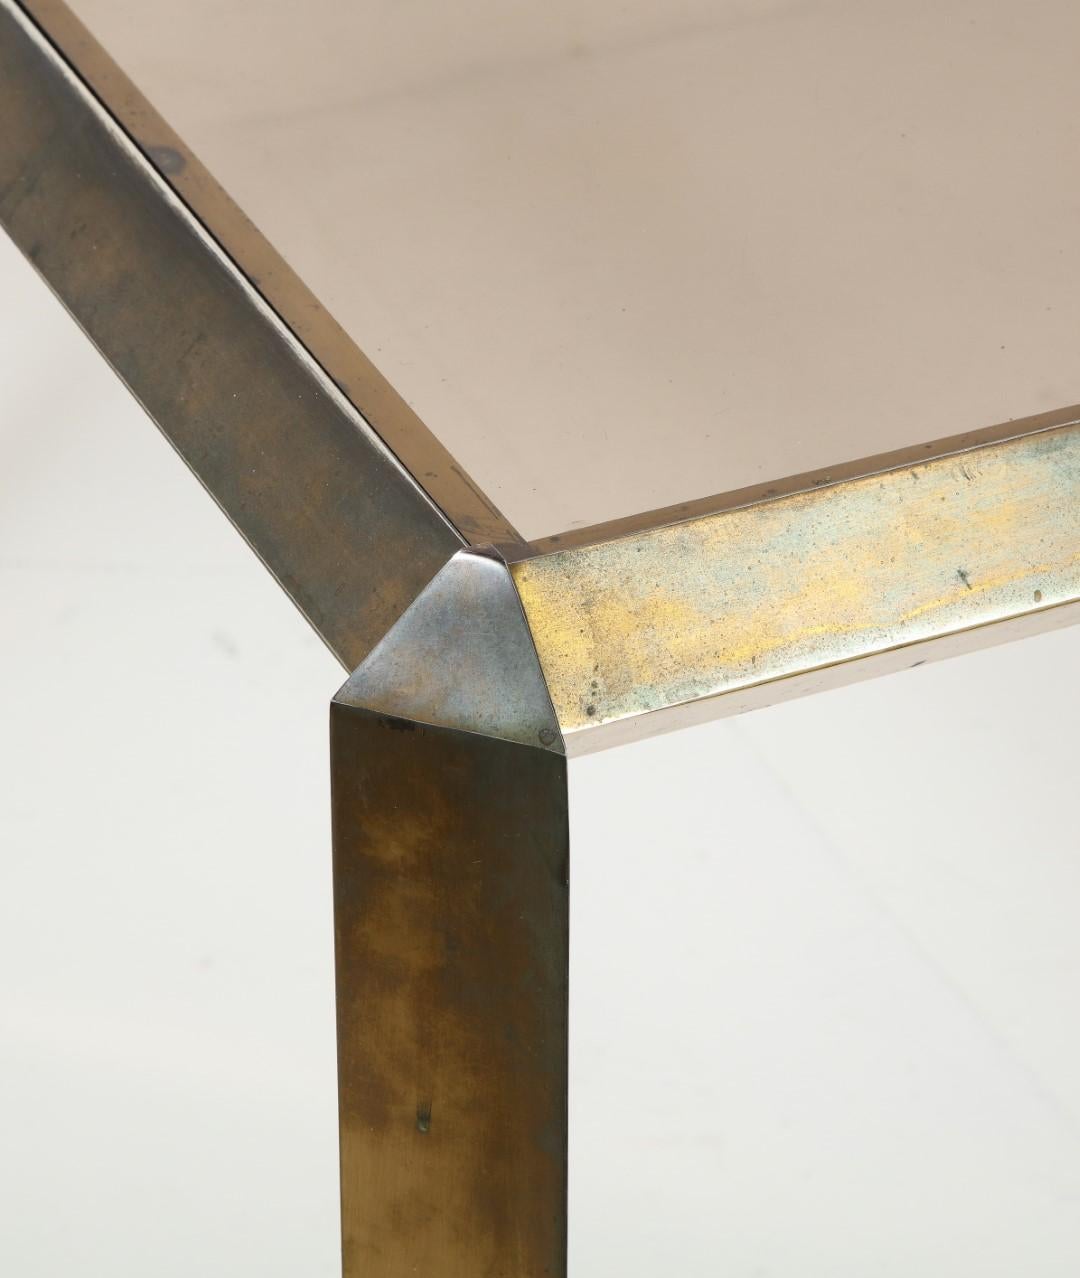 Midcentury 1970s Bauhaus style brass dining table with beveled brass edges around the smoked glass top.